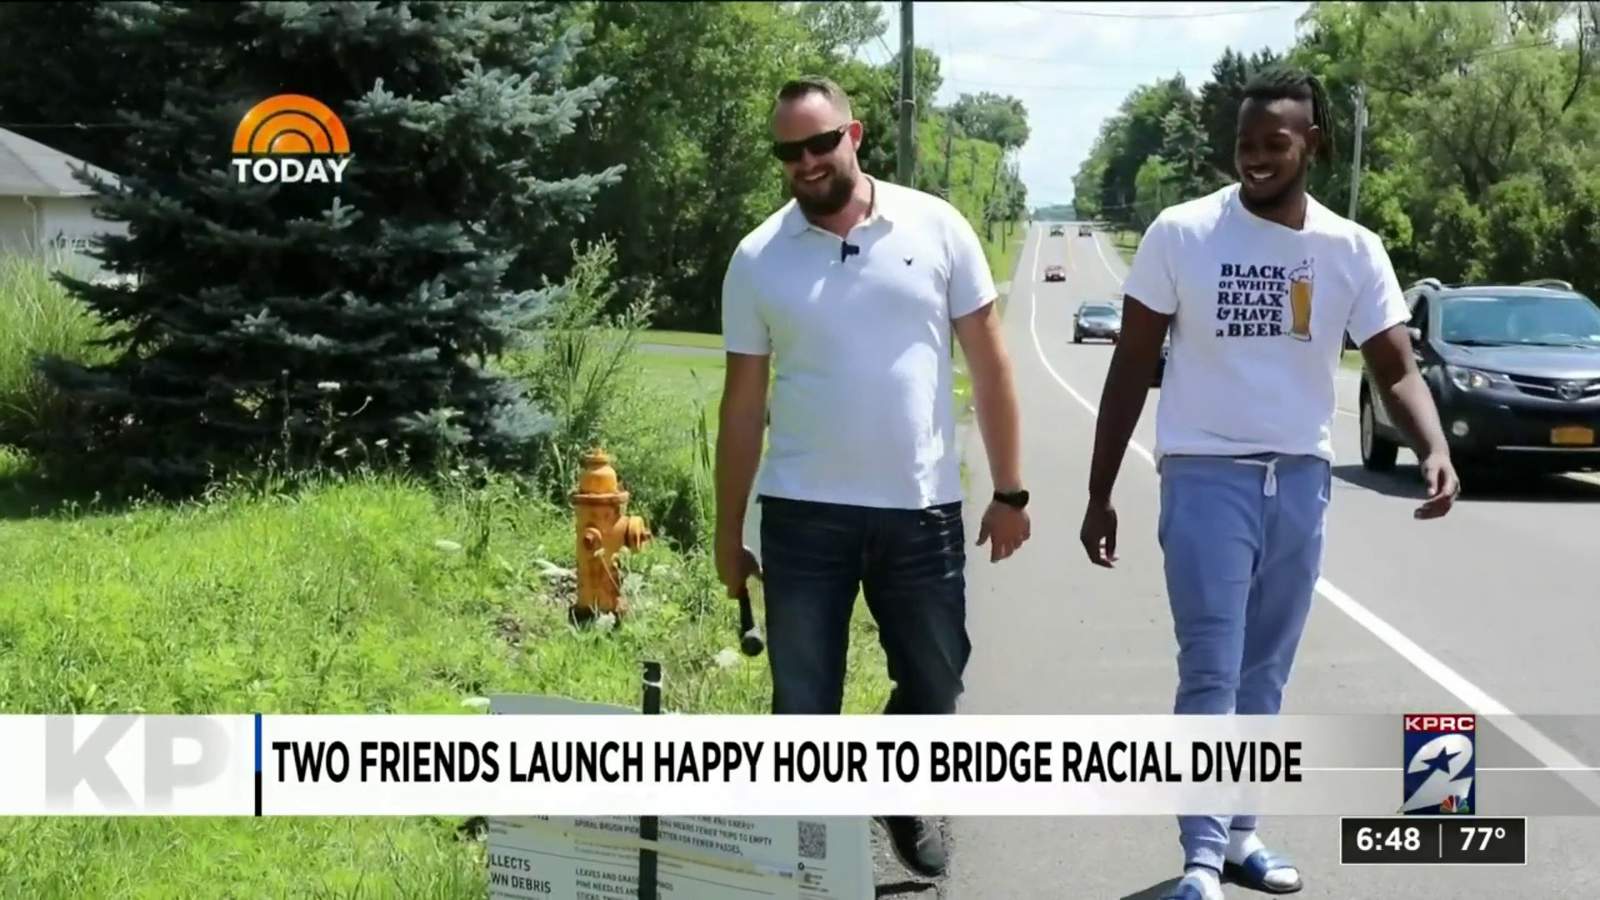 One Good Thing: 2 friends launch Happy Hour to bridge racial divide